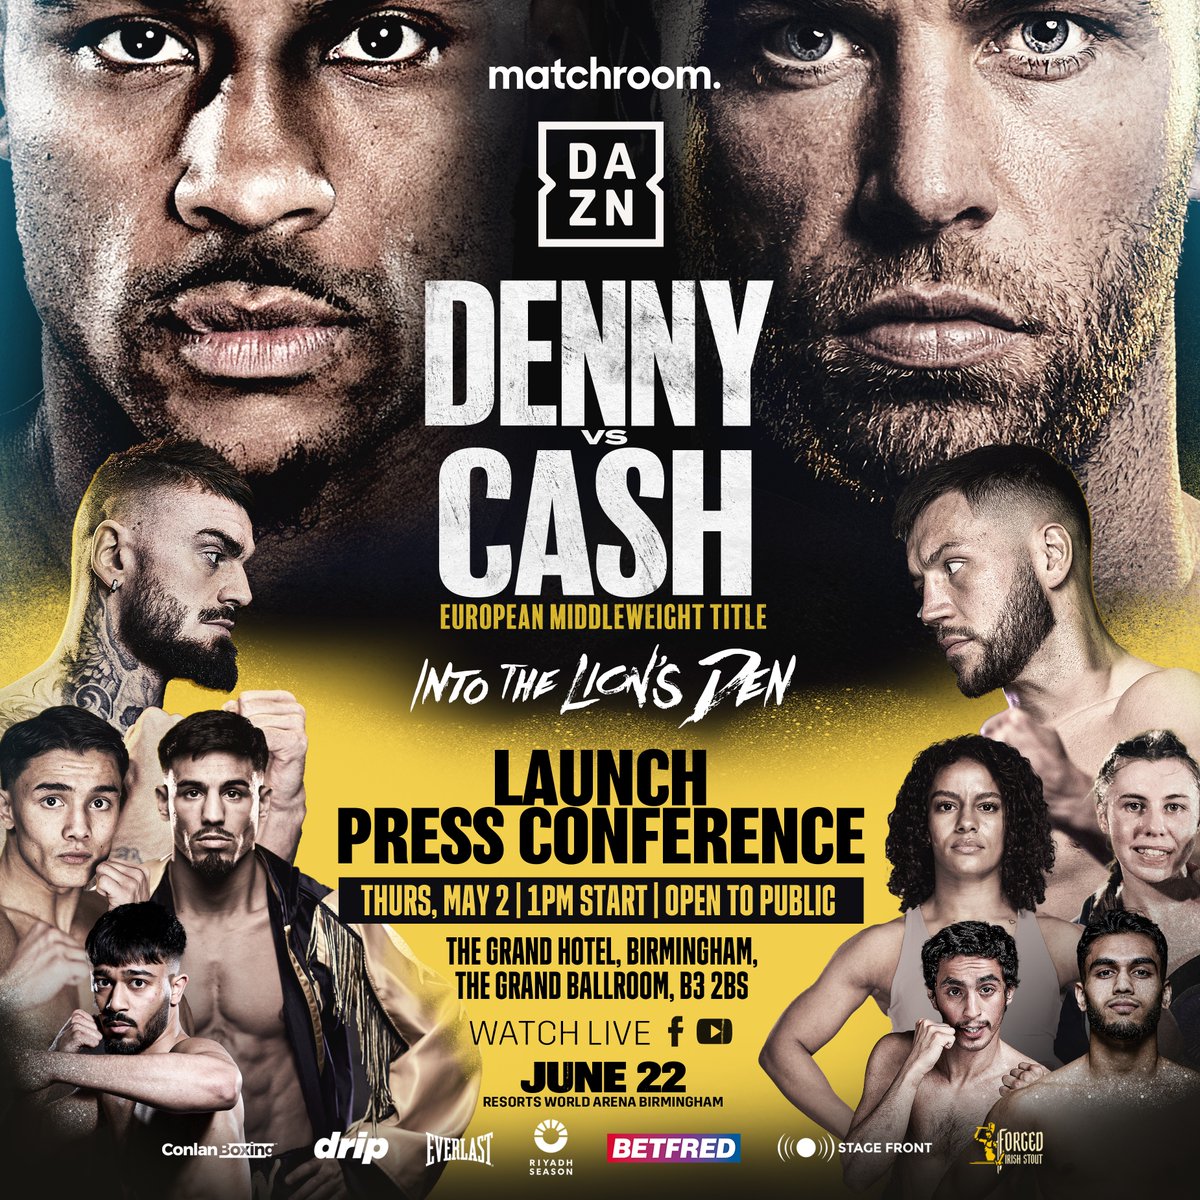 Launch presser for #DennyCash set for 1pm this Thursday! 🎙️🍿 @tnd91denny @FelixCashboxer @lewiscrocker1 @conah_walker @CameronVuong @jordz_flynn @realhamzauddin @mmali_79 @ibraheemspider Public welcome to The Grand Hotel in Birmingham to hear from main event + undercard 👊